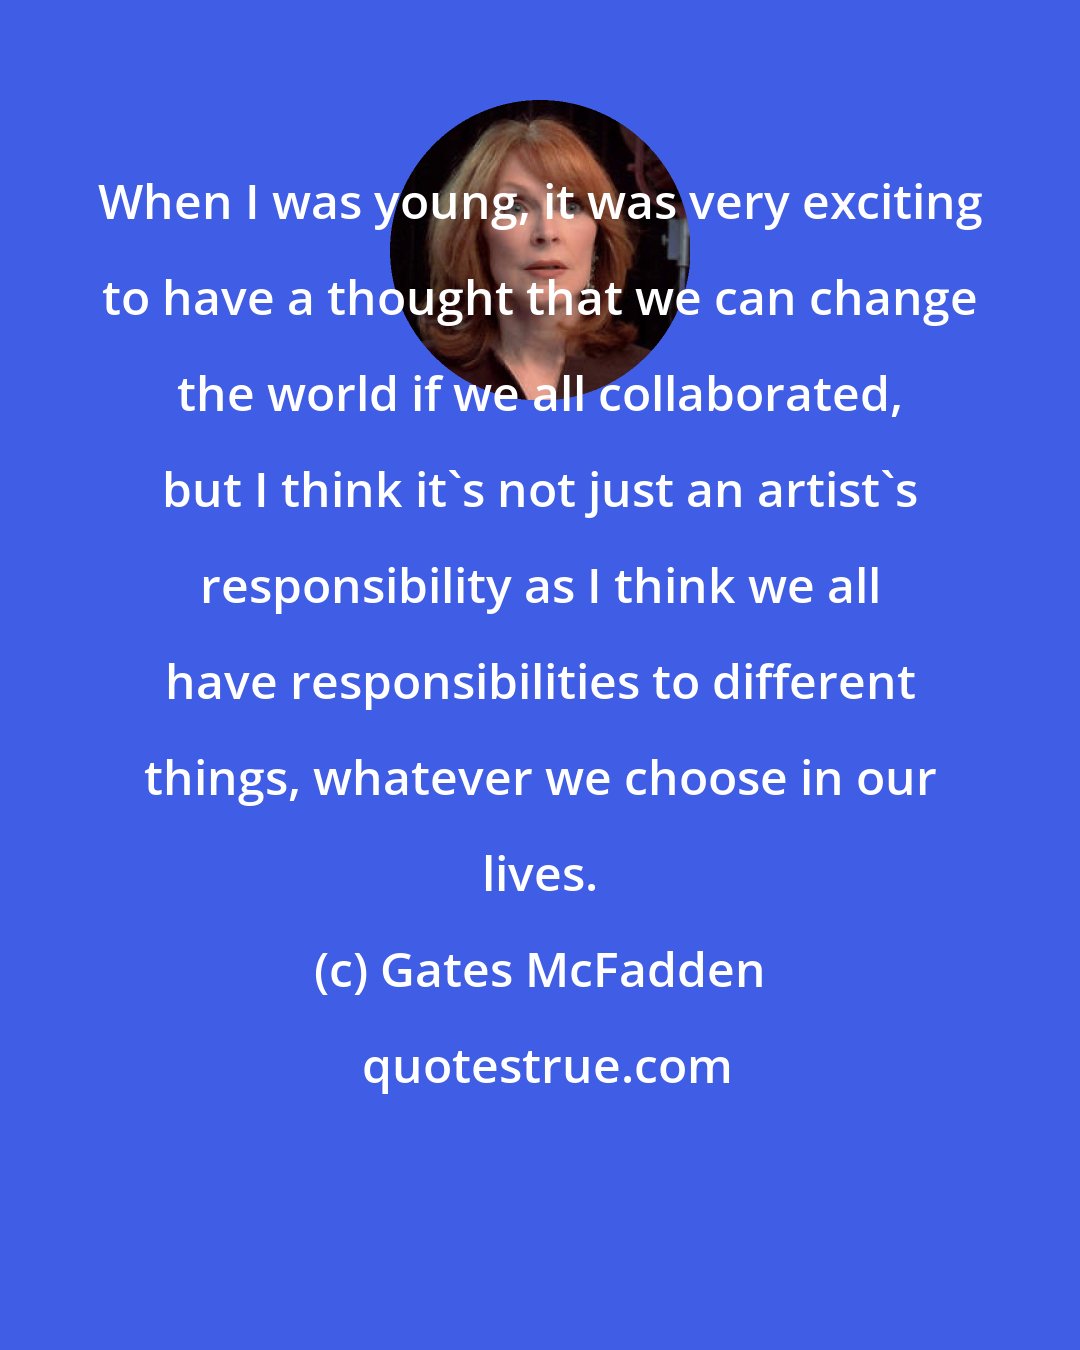 Gates McFadden: When I was young, it was very exciting to have a thought that we can change the world if we all collaborated, but I think it's not just an artist's responsibility as I think we all have responsibilities to different things, whatever we choose in our lives.